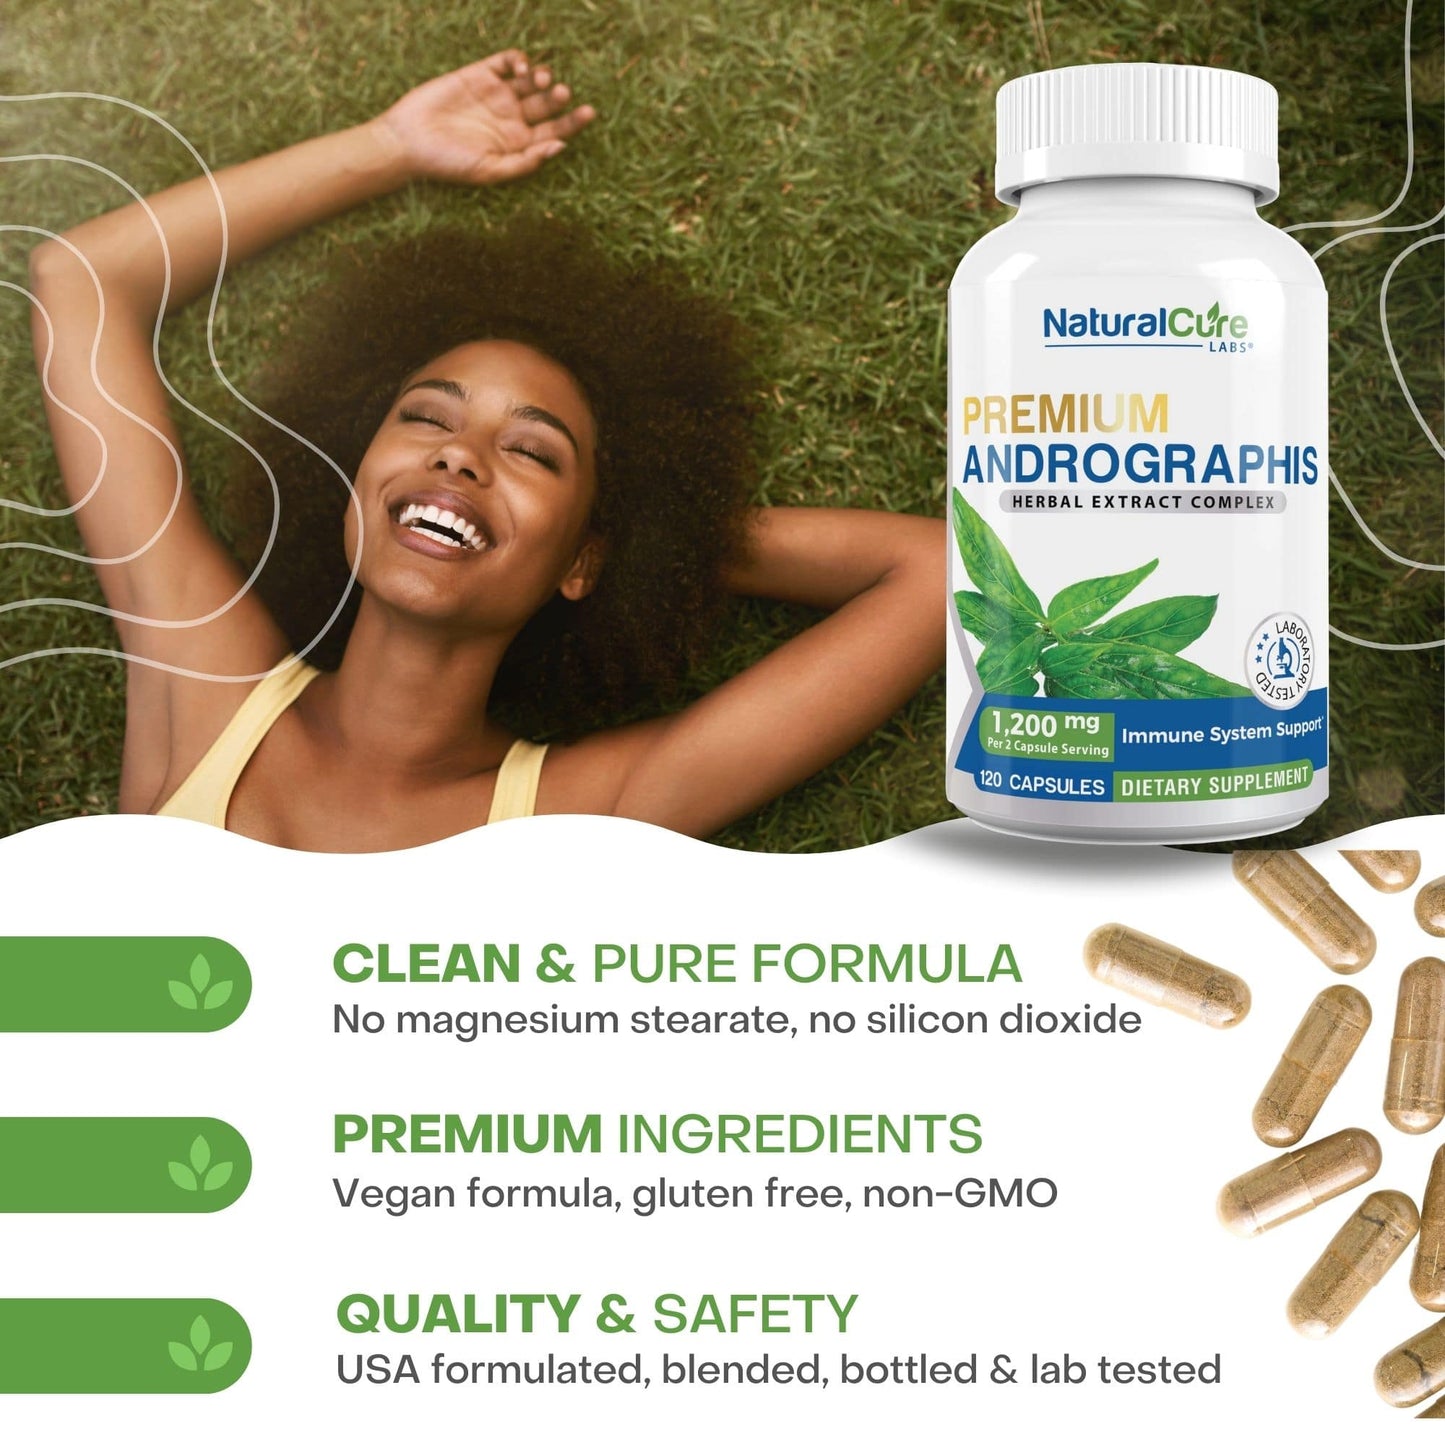 
                  
                    A woman enjoys a moment outdoors next to a bottle of NaturalCure Labs Andrographis, emphasizing the supplement's clean and pure formula for immune support.
                  
                